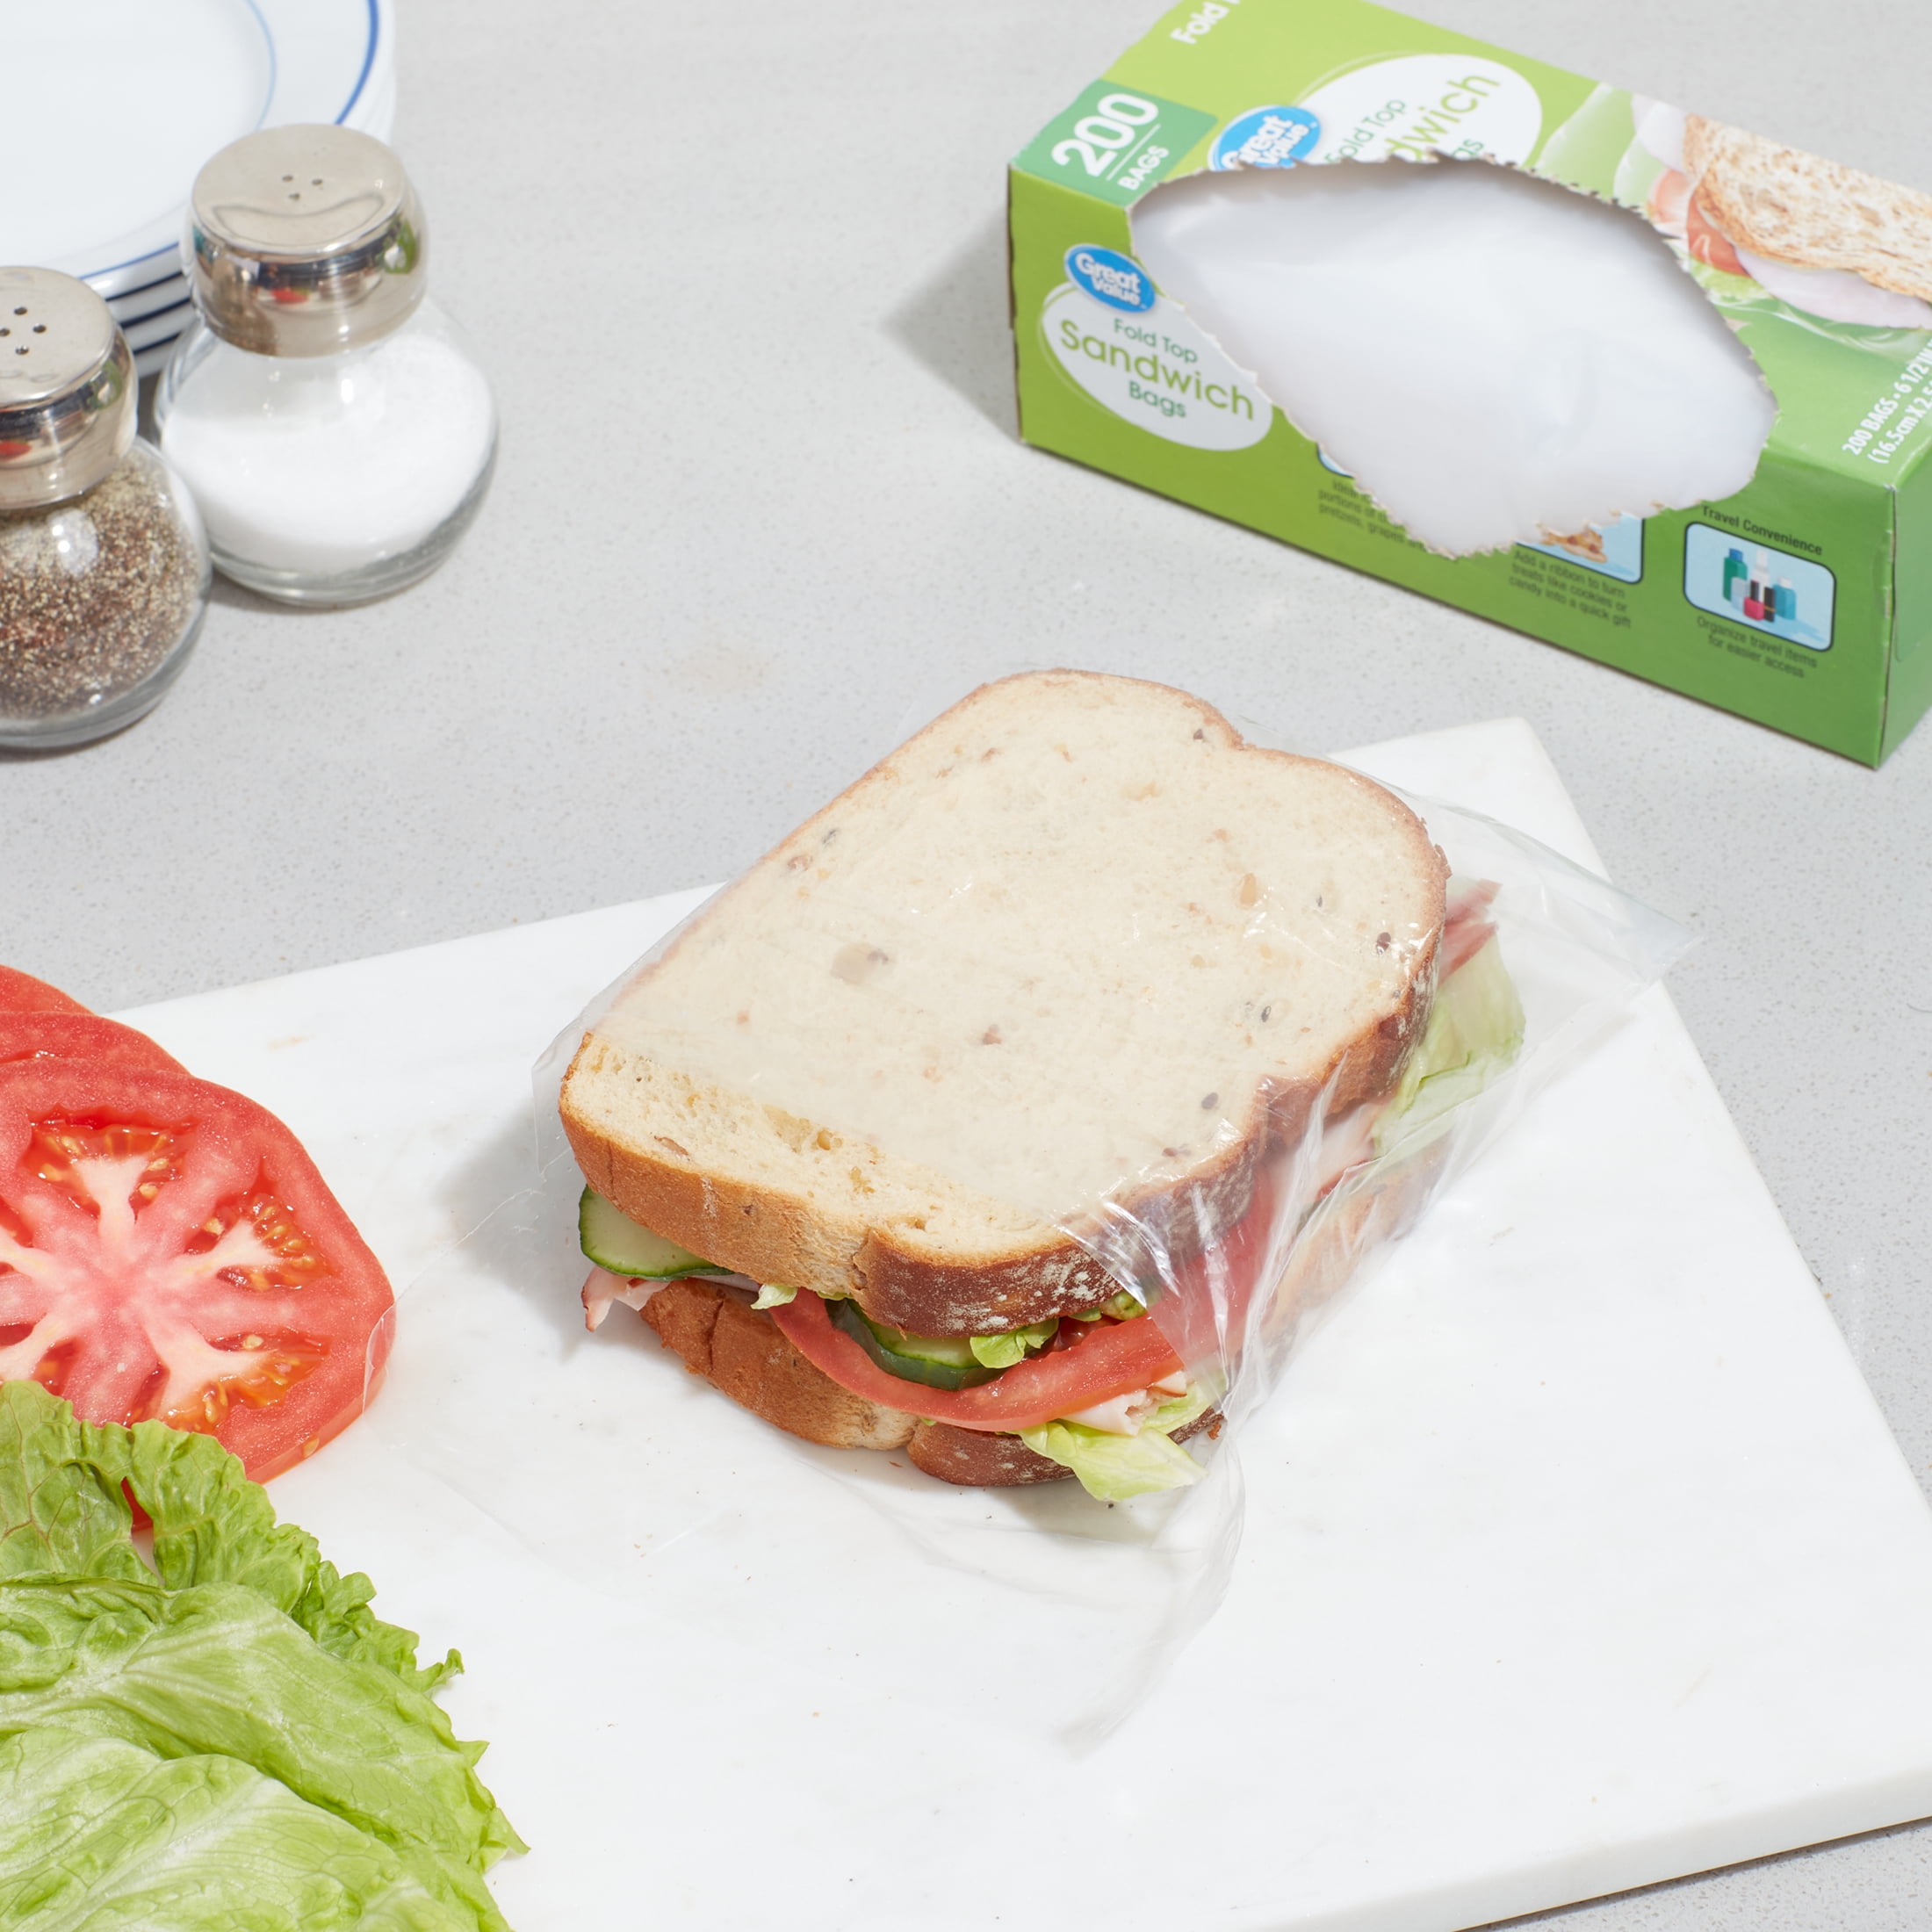 Ri Pac Fold Top Sandwich and Snack Bags- 7 x 7 +1.5 inches - 1000 Count -  Food Storage for Kids Lunch